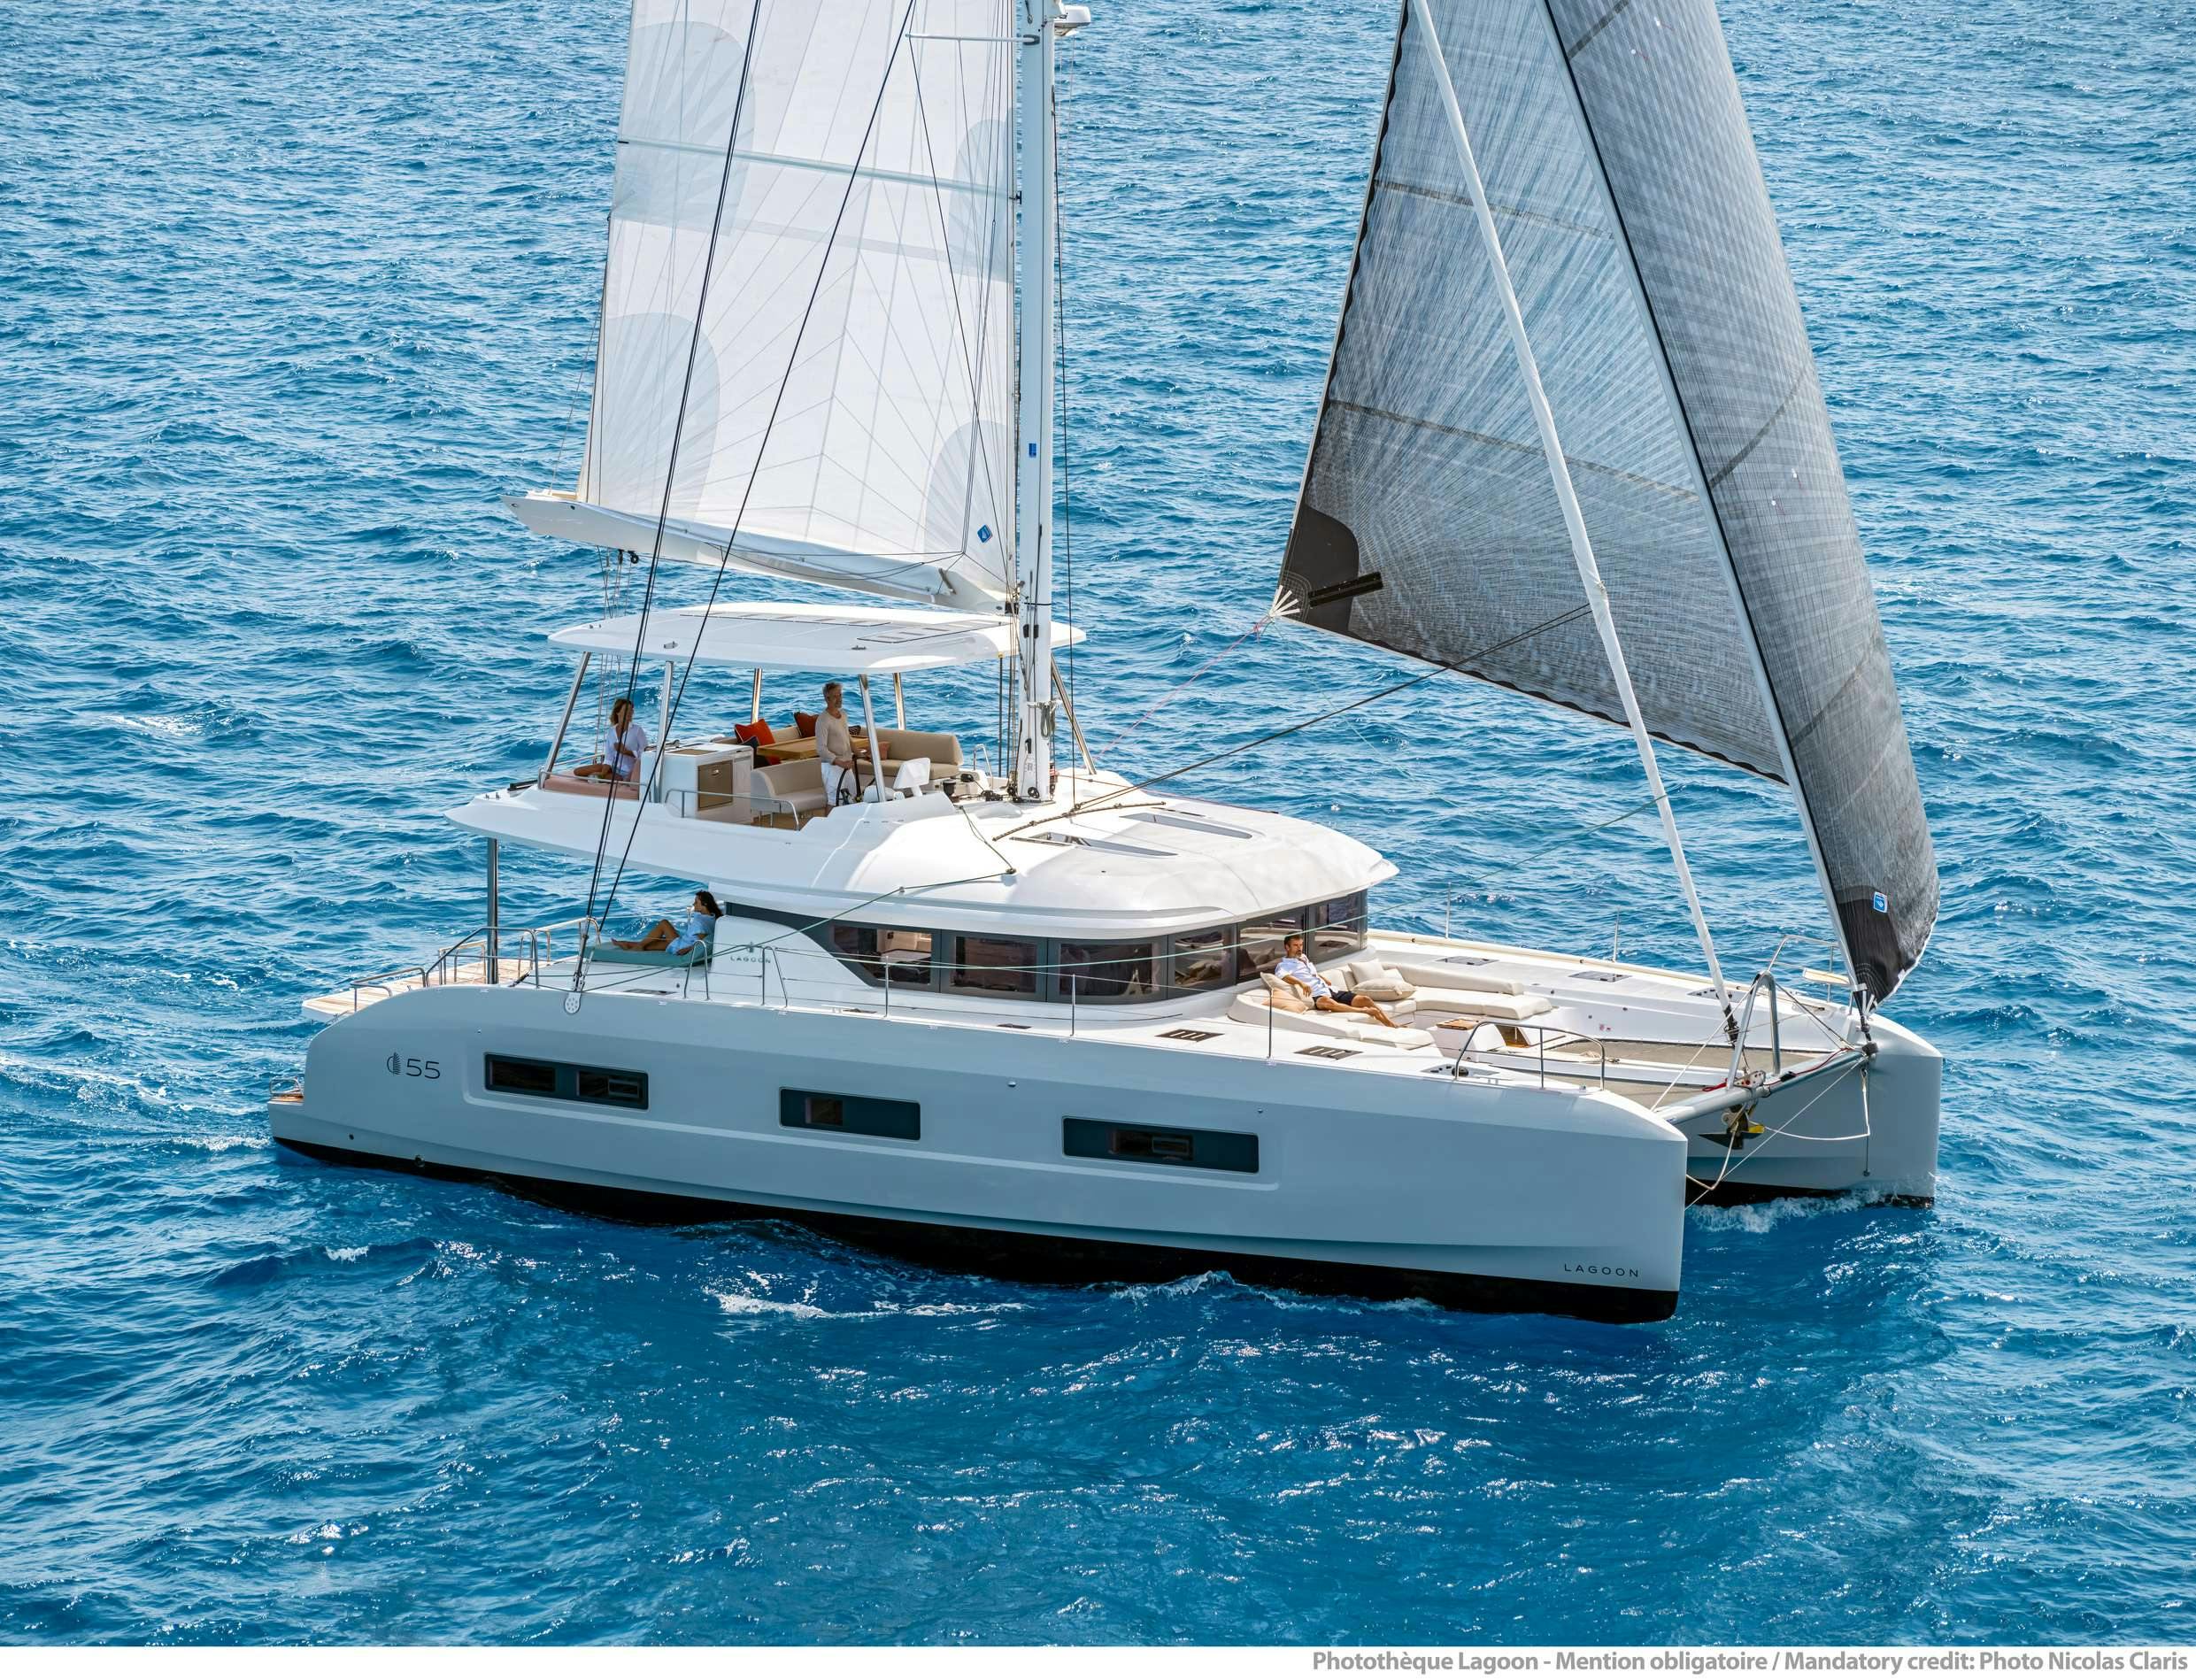 VALIUM 55 - Yacht Charter Cheshire & Boat hire in Greece 1